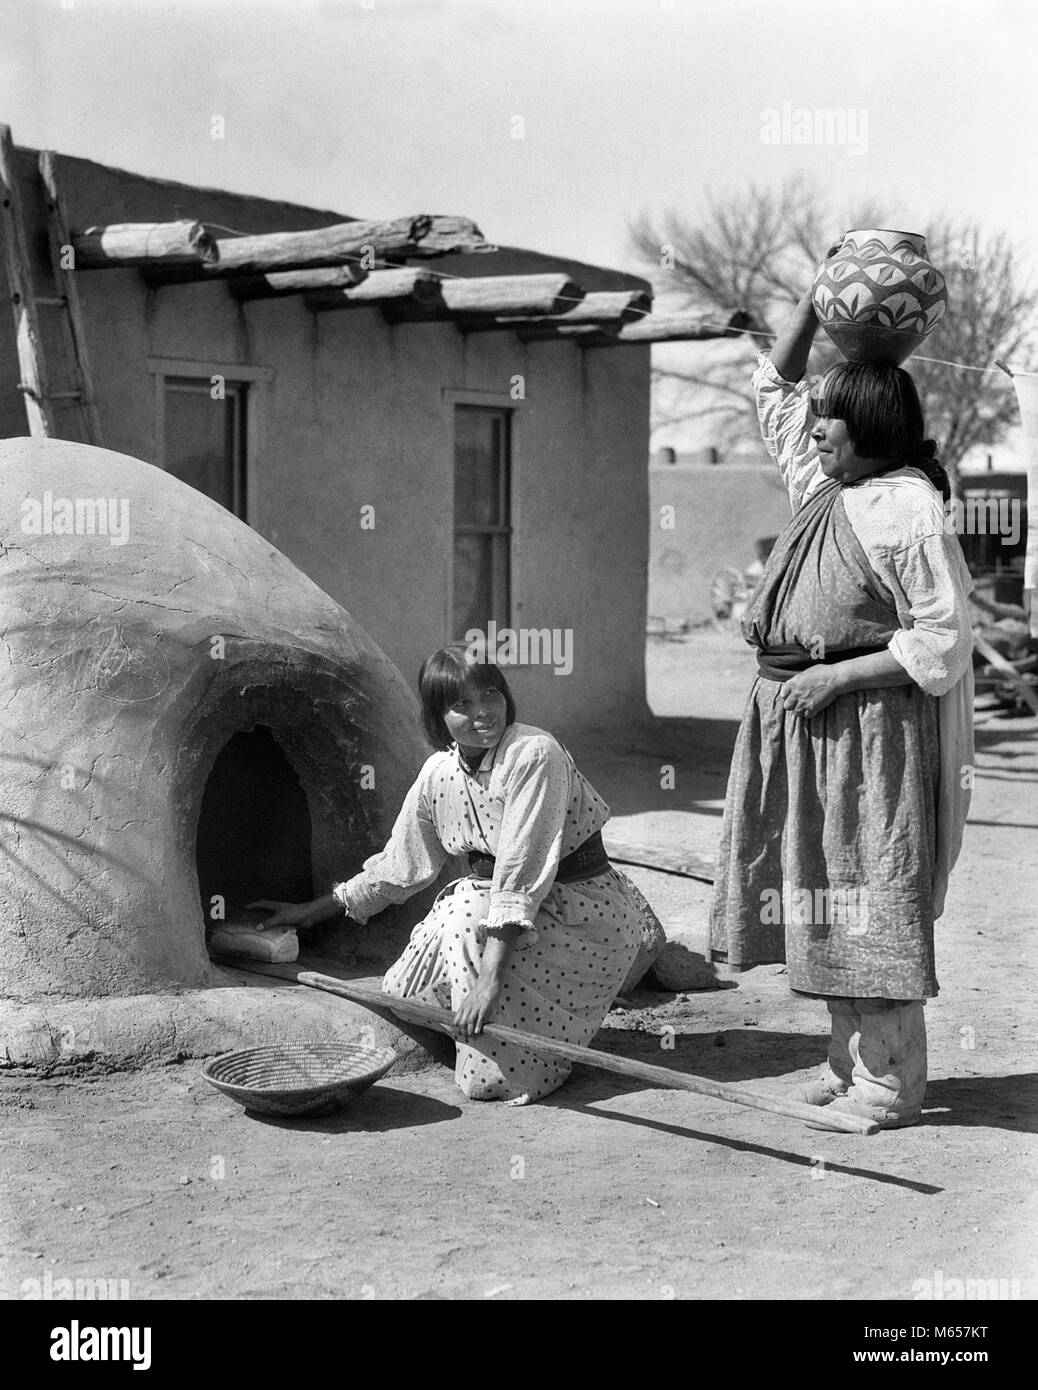 1930s TWO NATIVE AMERICAN WOMEN CARRYING OLLA WATER JAR ON HEAD AND BAKING BREAD IN HORNO OVEN SAN ILDEFONSO PUEBLO NM USA - i1559 HAR001 HARS FRIENDSHIP FULL-LENGTH LADIES INDIANS SPIRITUALITY AMERICANA NOSTALGIA MIDDLE-AGED NORTH AMERICA TOGETHERNESS JAR 25-30 YEARS 45-50 YEARS NORTH AMERICAN MIDDLE-AGED WOMAN AND MUD NATIVE AMERICAN PUEBLO SAN ILDEFONSO MID-ADULT MID-ADULT WOMAN NEW MEXICO YOUNG ADULT WOMAN ADOBE-BUILT B&W BLACK AND WHITE HORNO OVEN INDIGENOUS OLD FASHIONED OLLA OUTDOOR OVEN PERSONS SAN ILDEFONSO SOUTHWEST SOUTHWESTERN Stock Photo